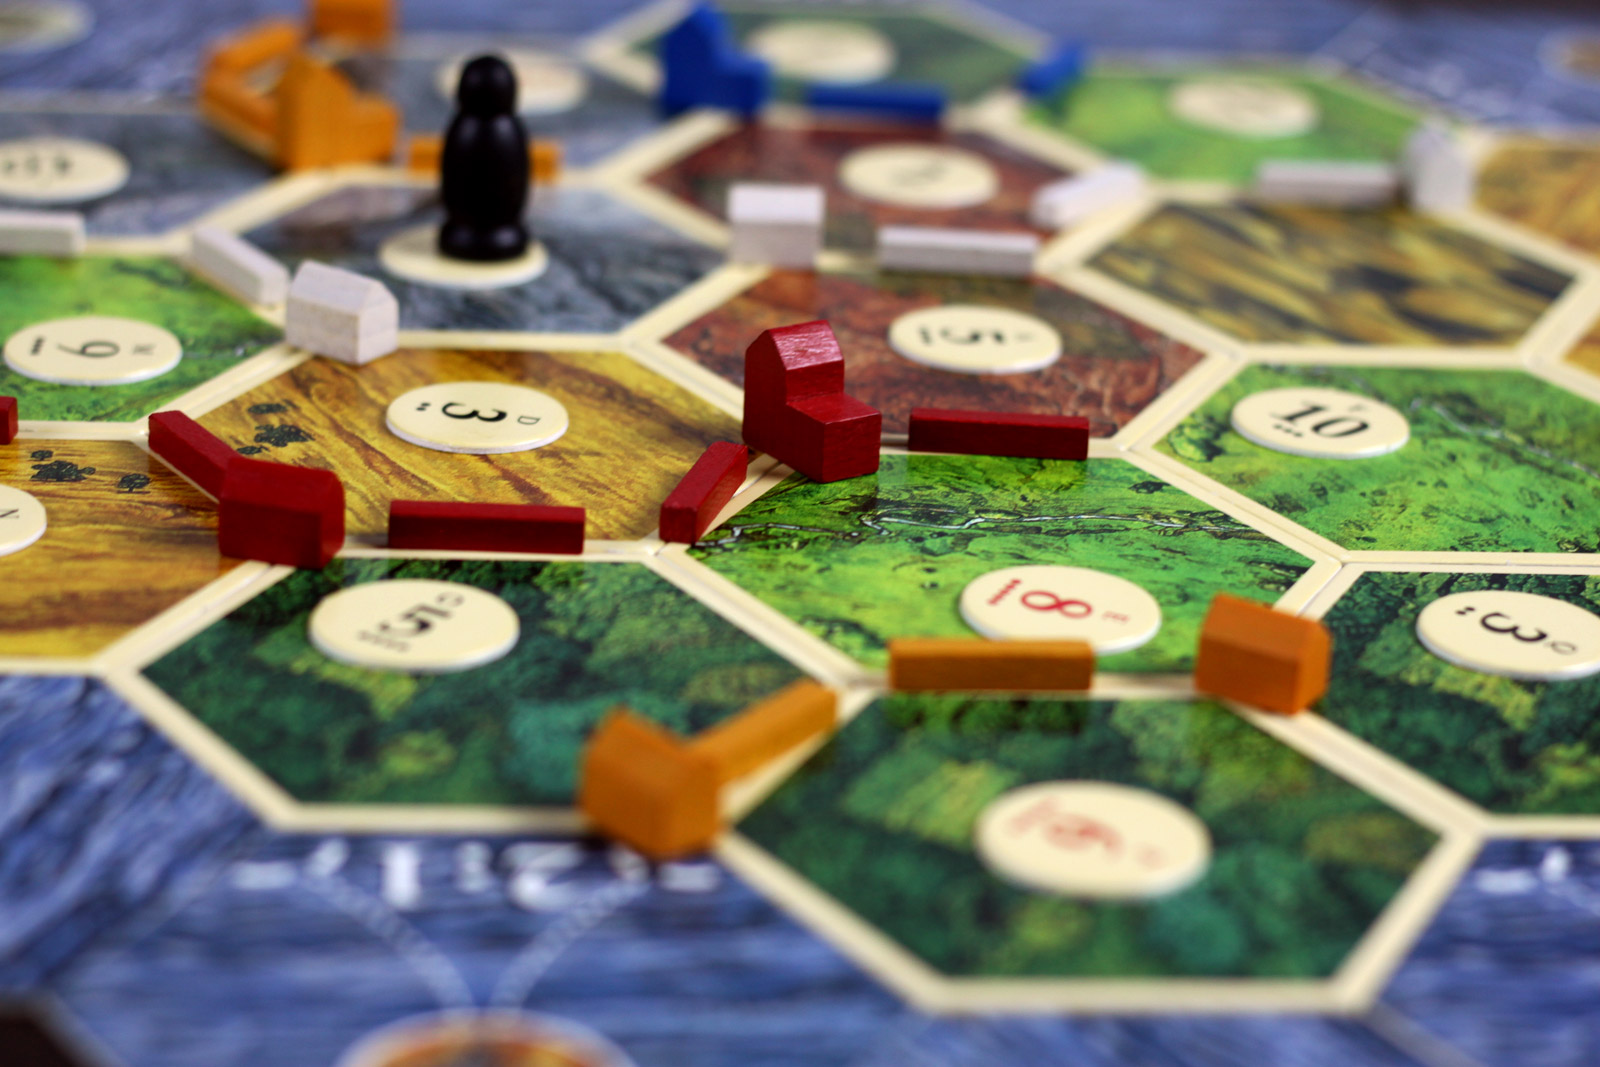 settlers of catan game